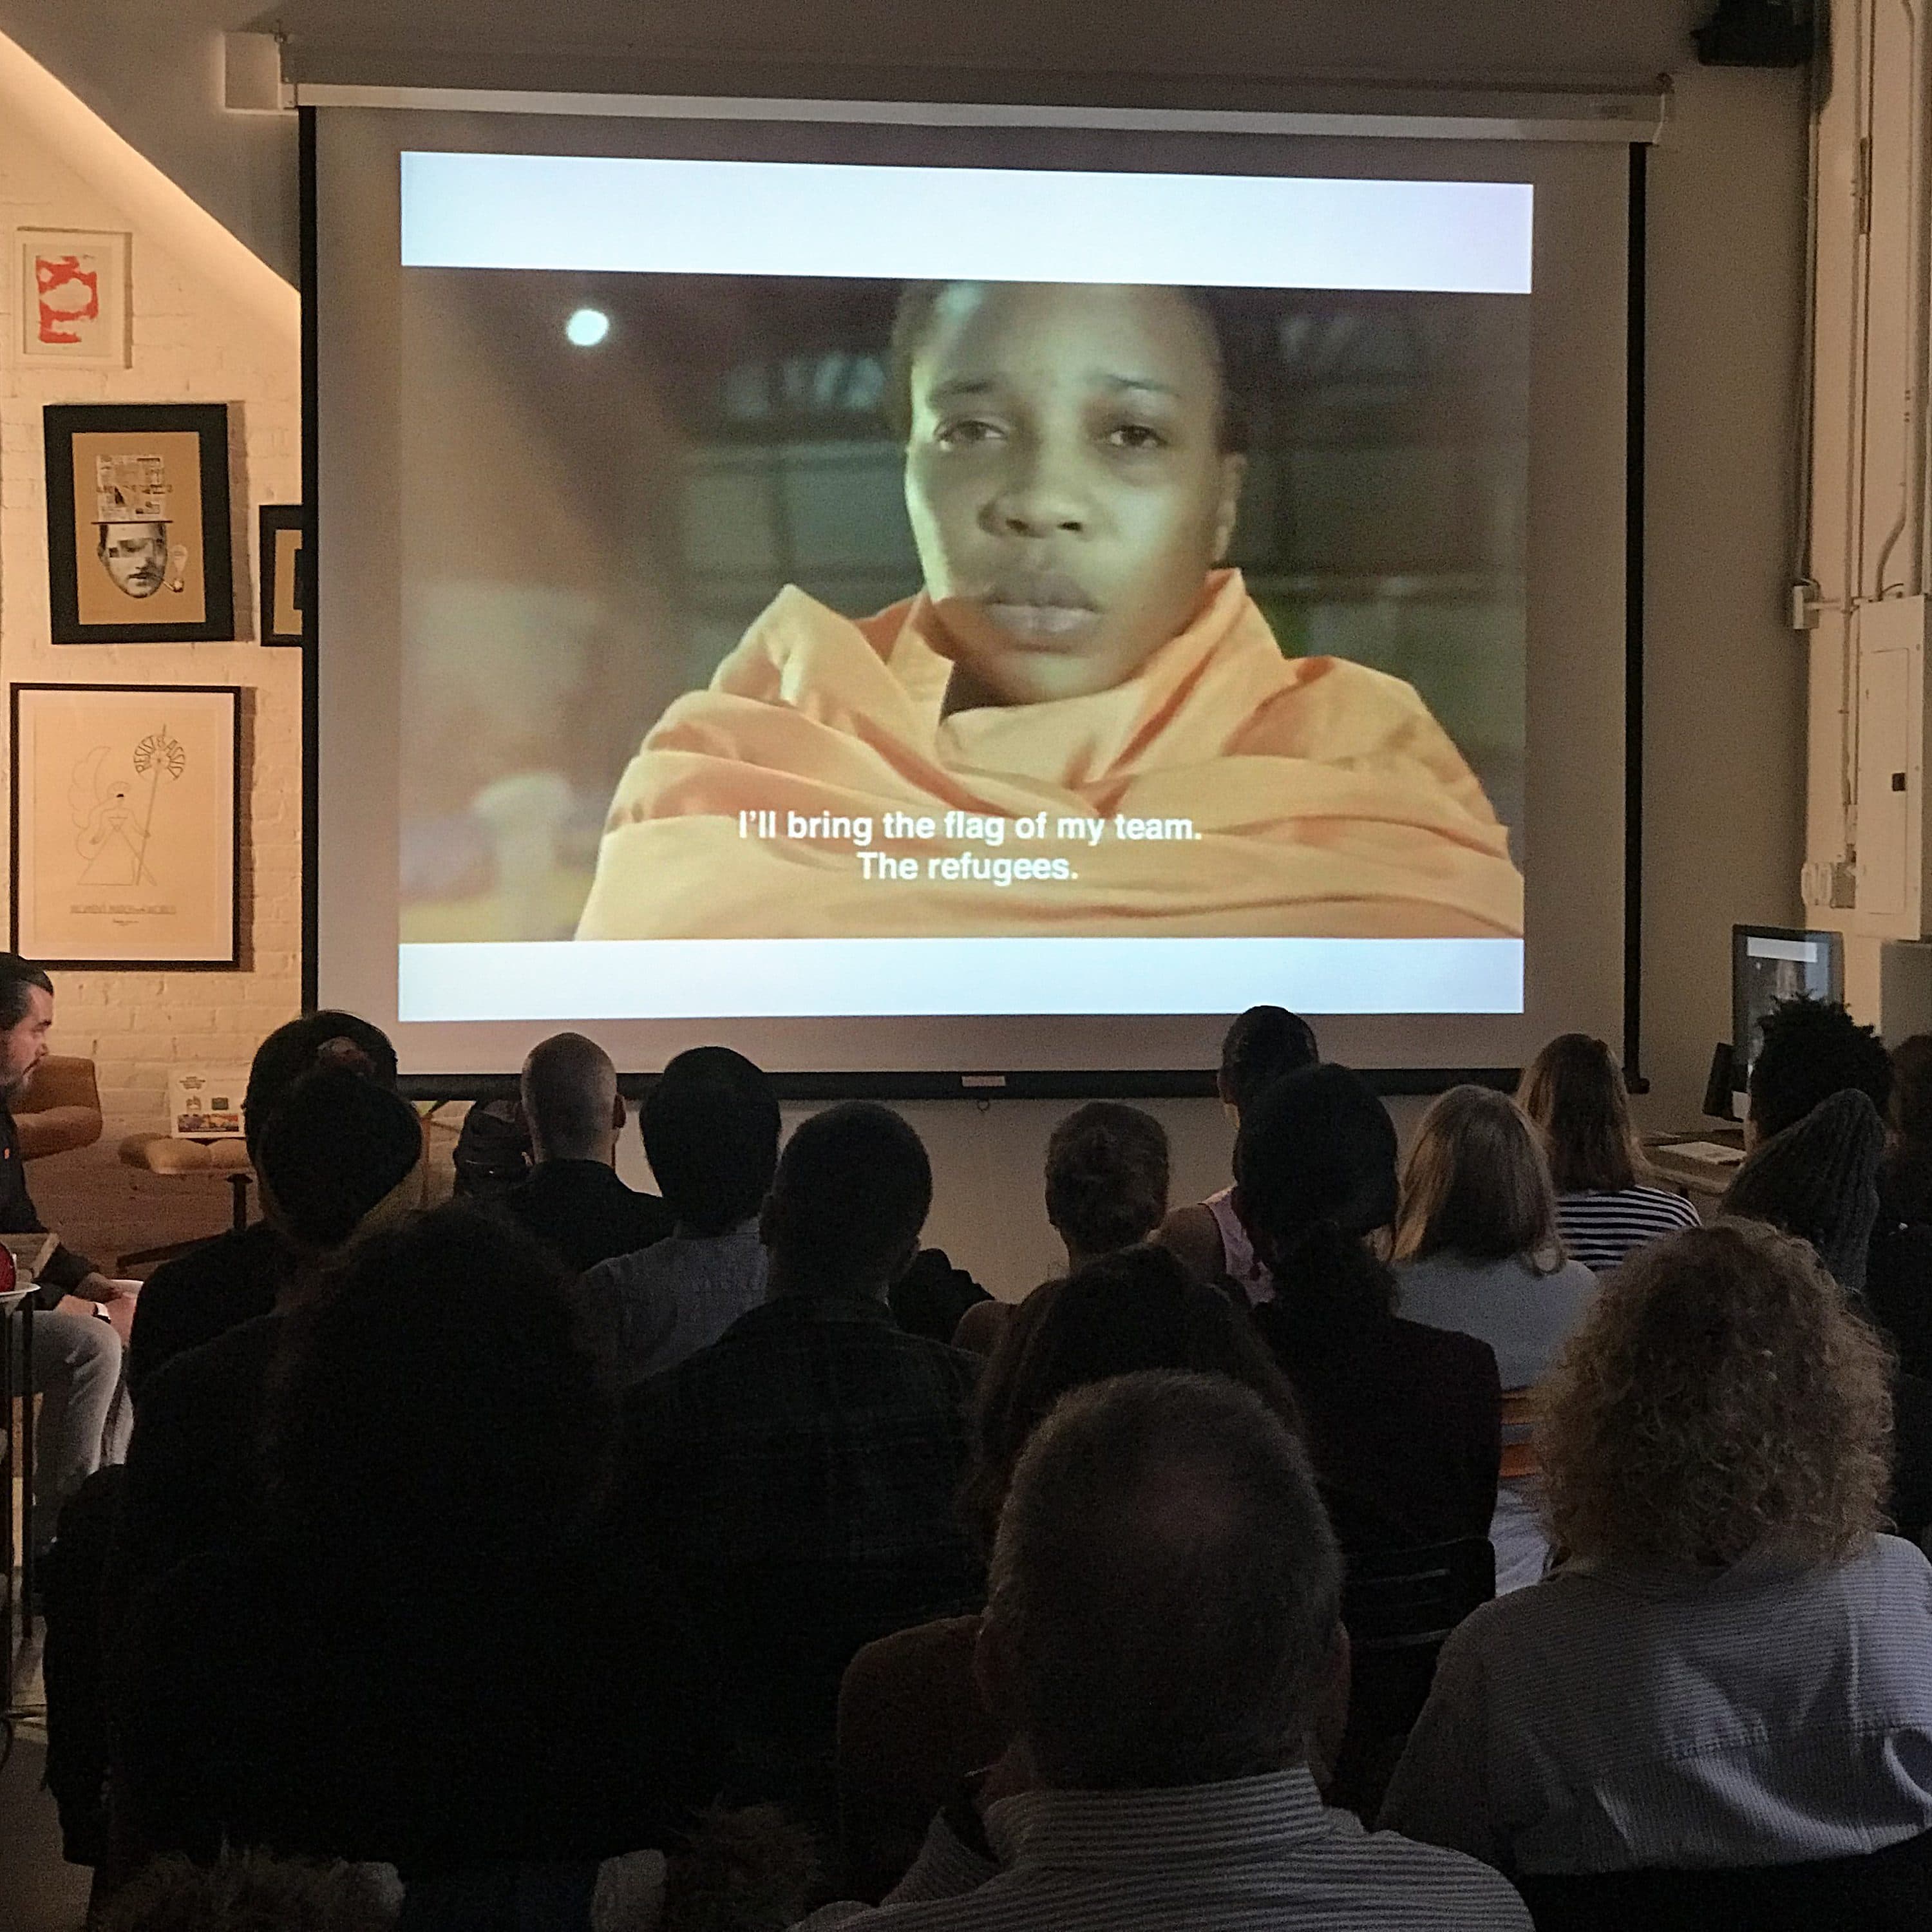 A group of people seated in a dimly lit room watches a film projected on a screen. The film shows a person wrapped in an orange blanket with the subtitle, "I'll bring the flag of my team. The refugees." Art and posters are displayed on the room's walls.